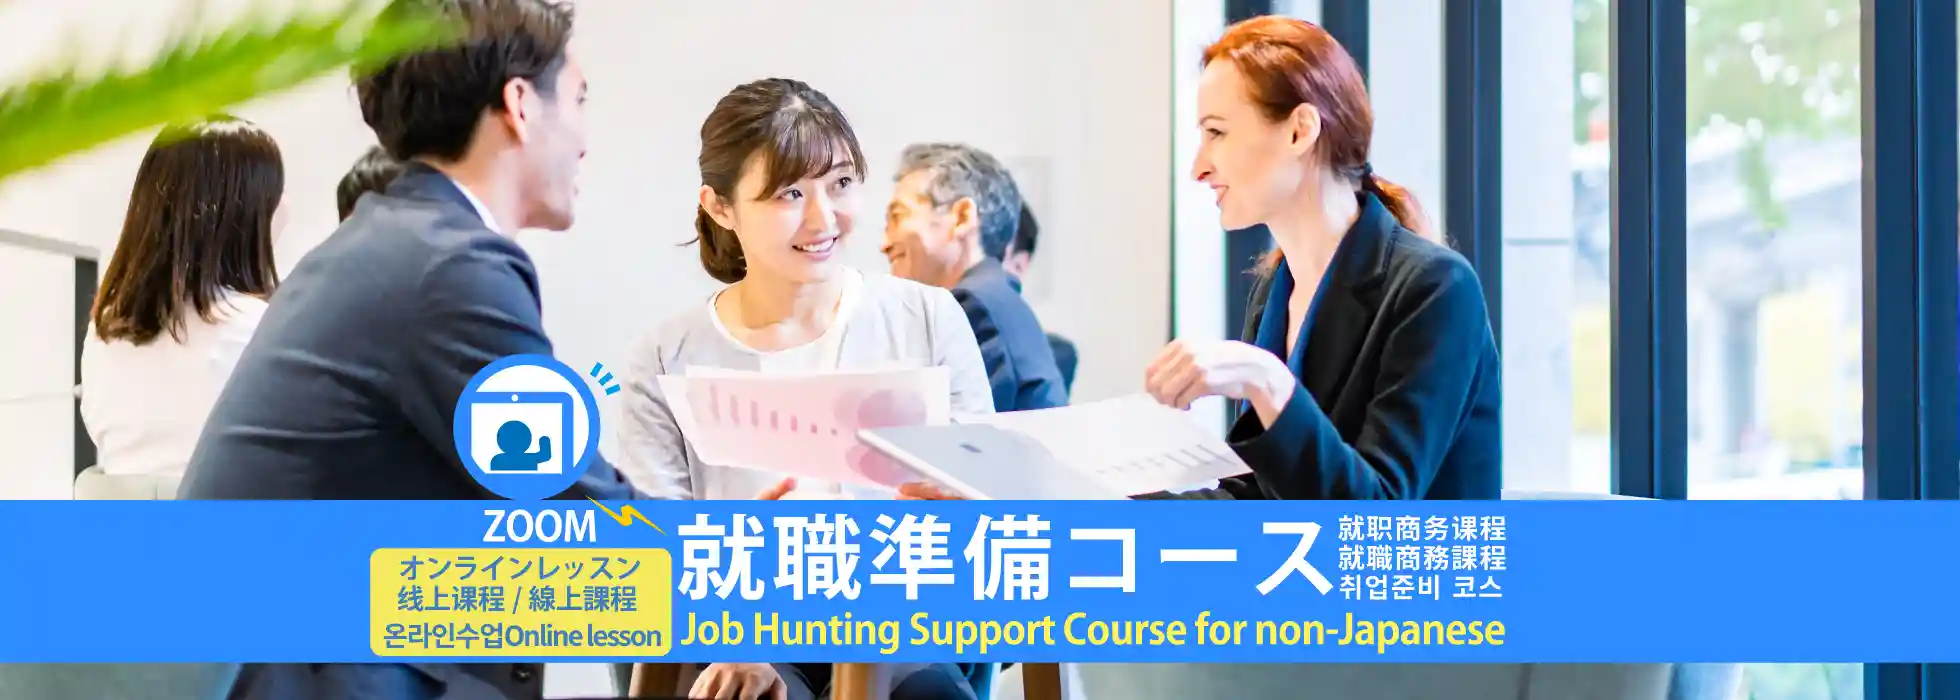 Job Hunting Support Course